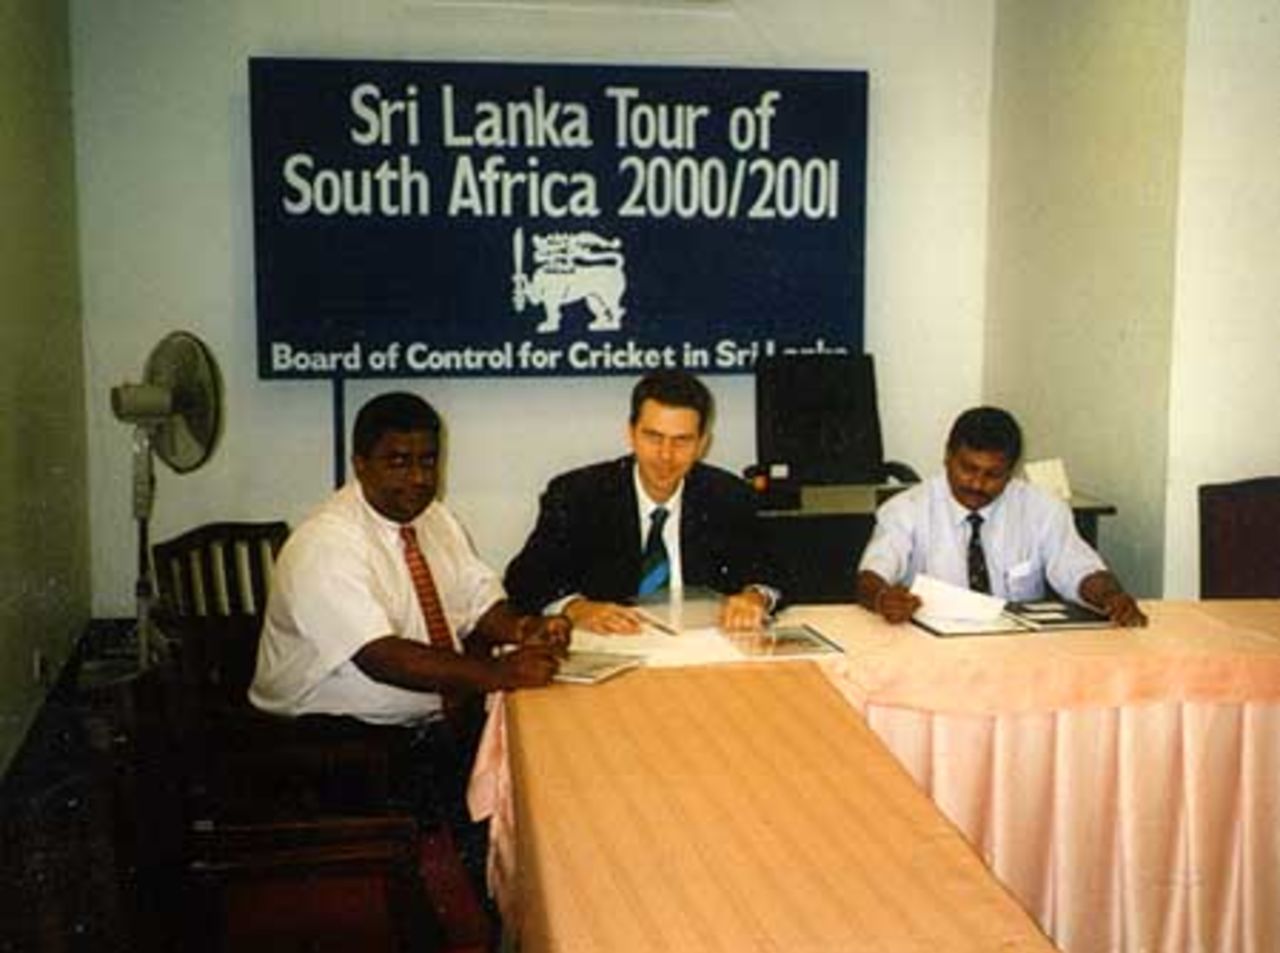 ICC Development Manager Andrew Eade with ACC Development Chairman Duleep Mendis (left) in Colombo